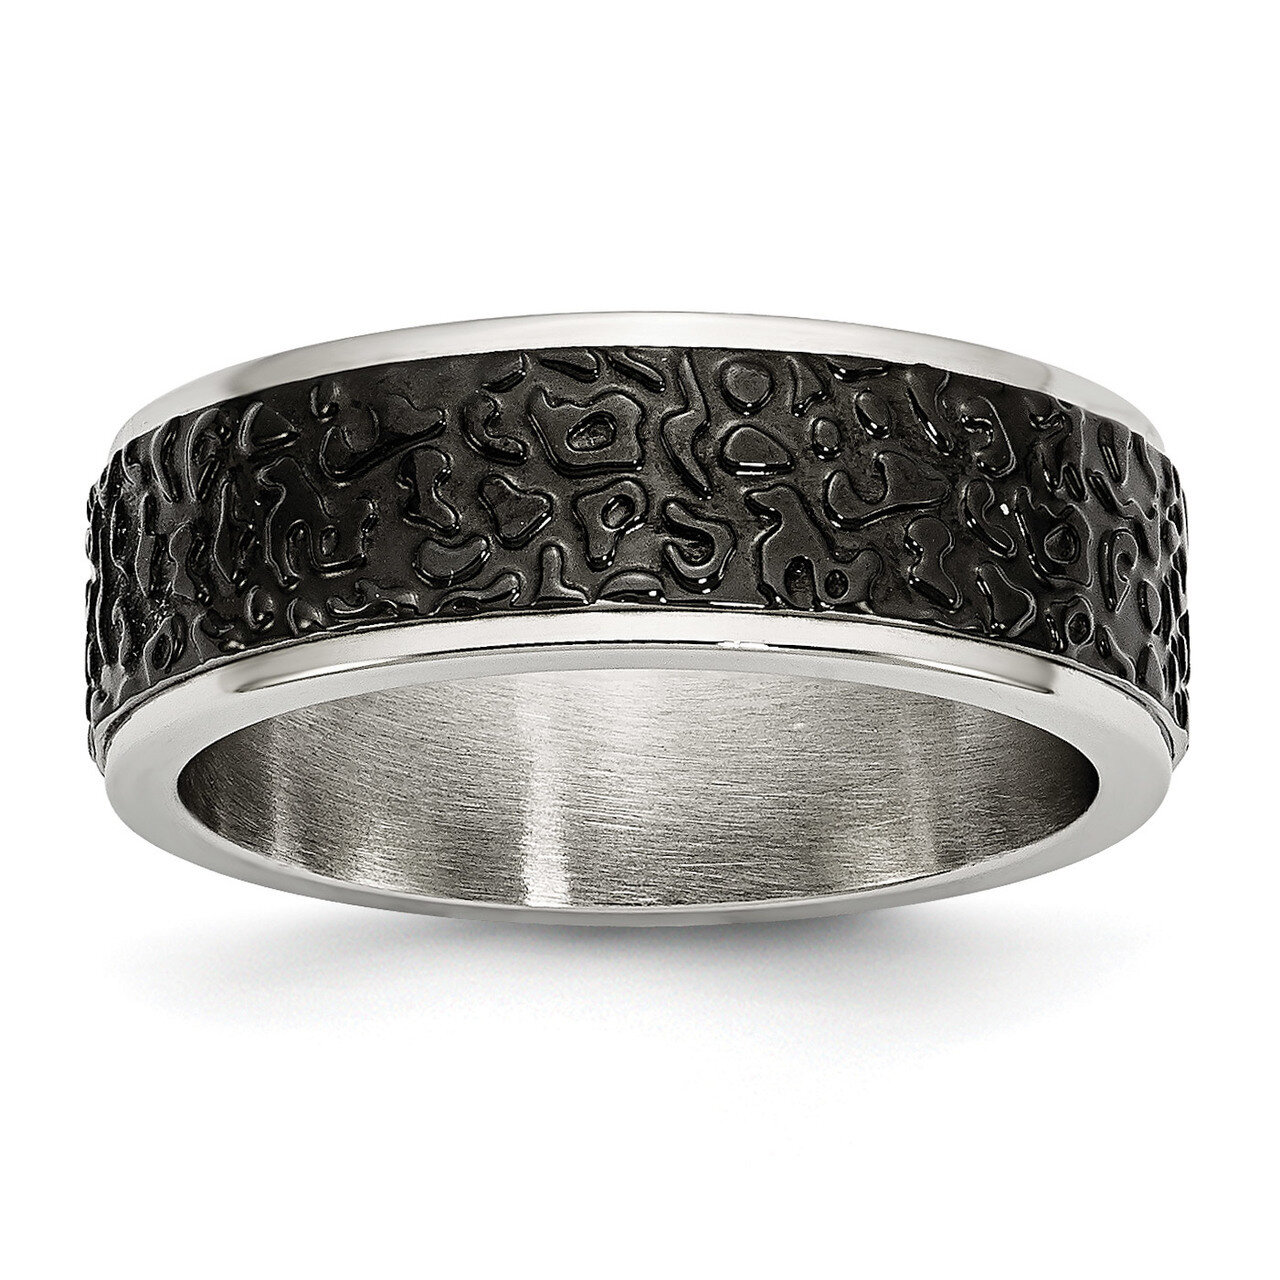 Polished and Textured Black Ip-Plated Band Stainless Steel SR480-10